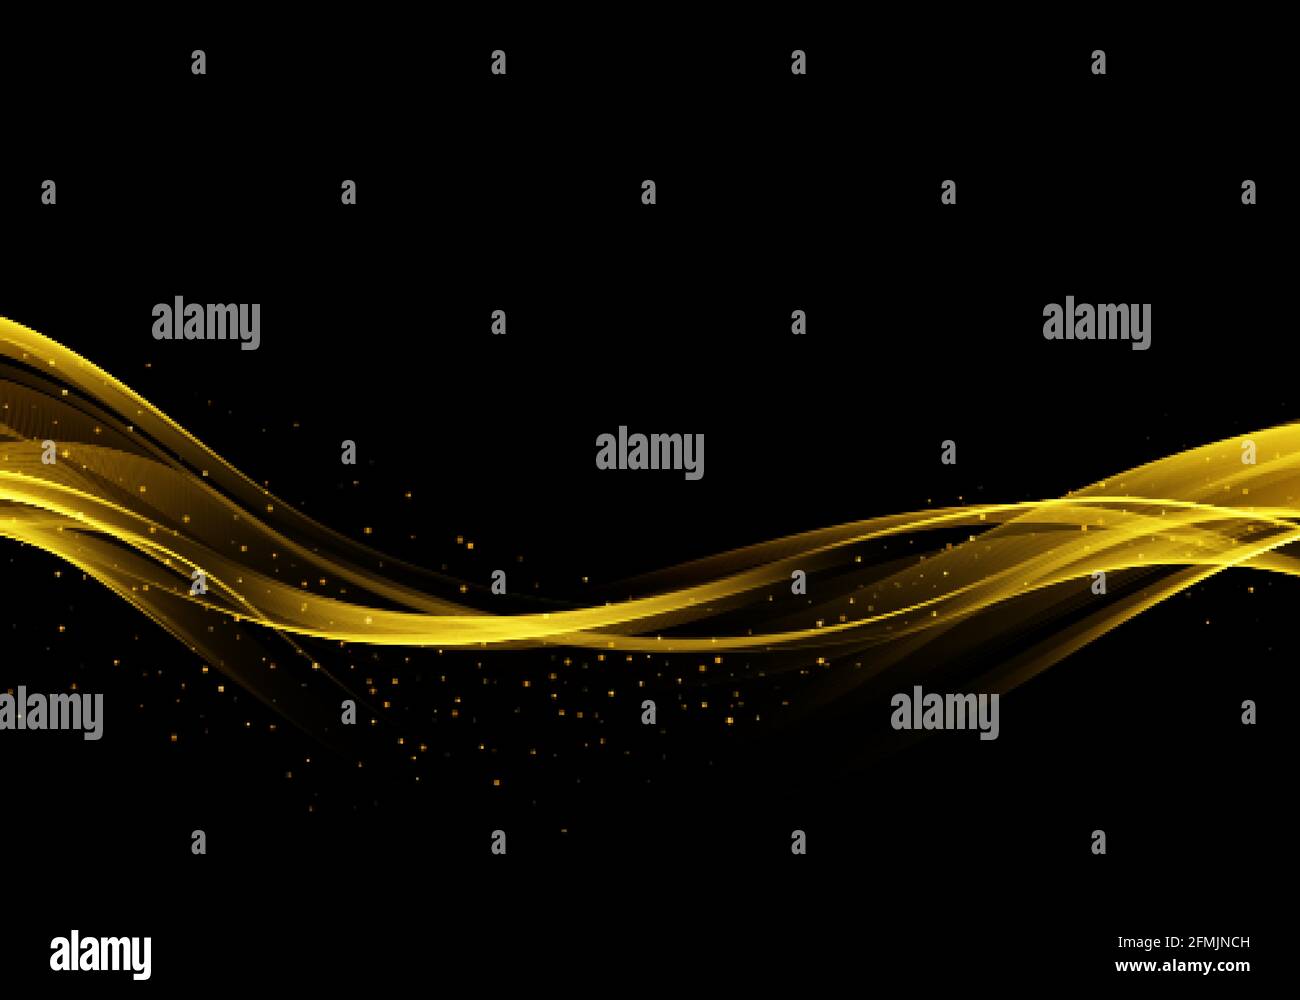 Abstract digital art background with gold line Gold wave Stock Vector